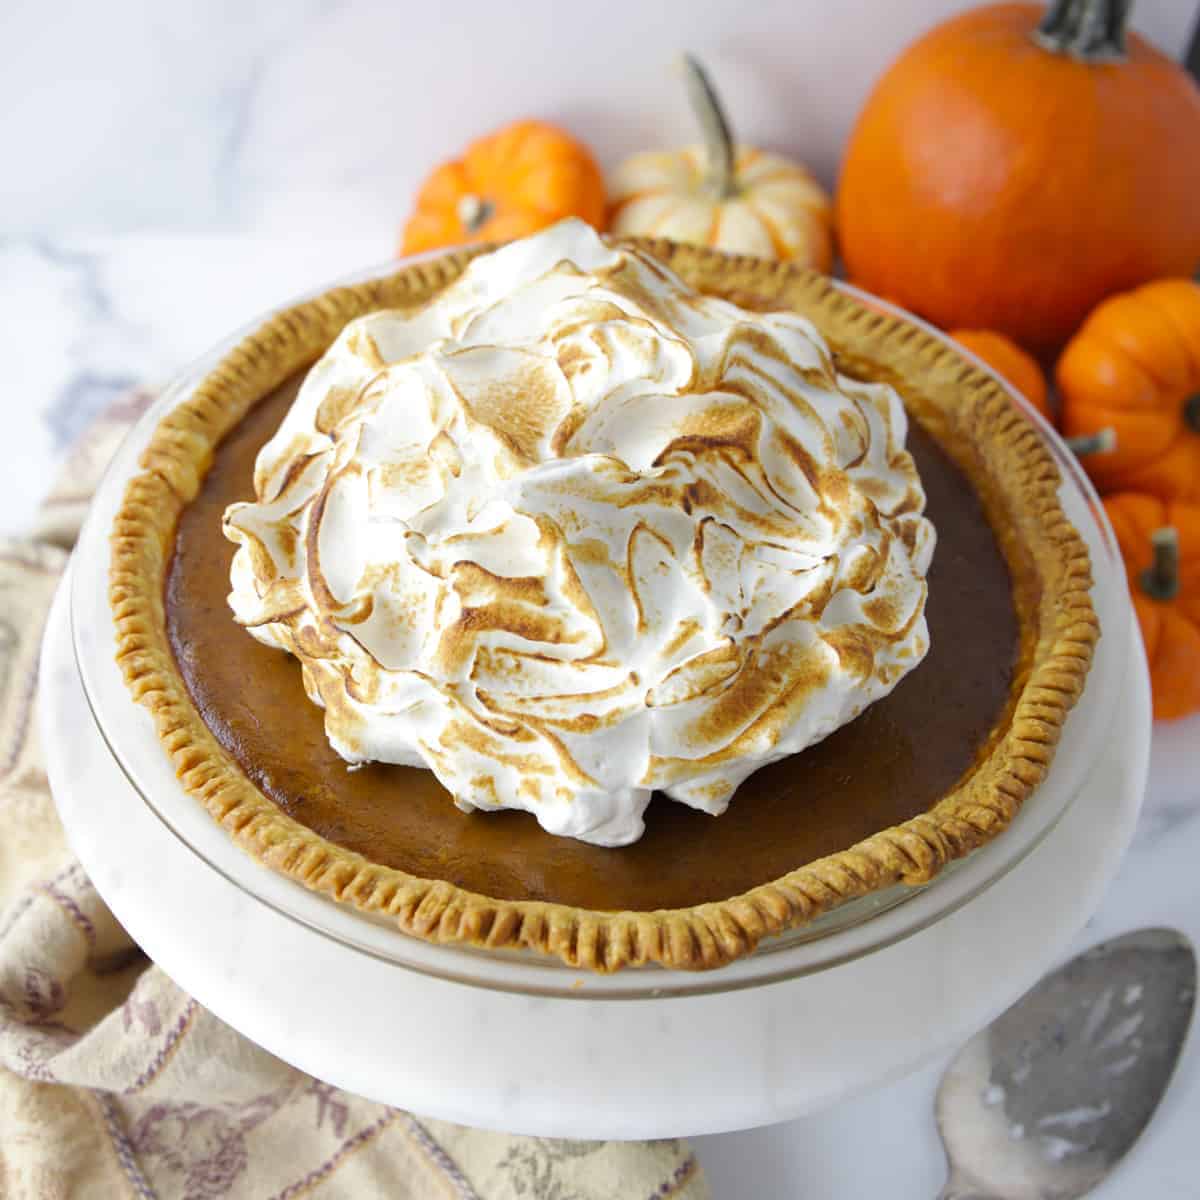 A whole pumpkin pie with toasted meringue on top, small pumpkins in background.